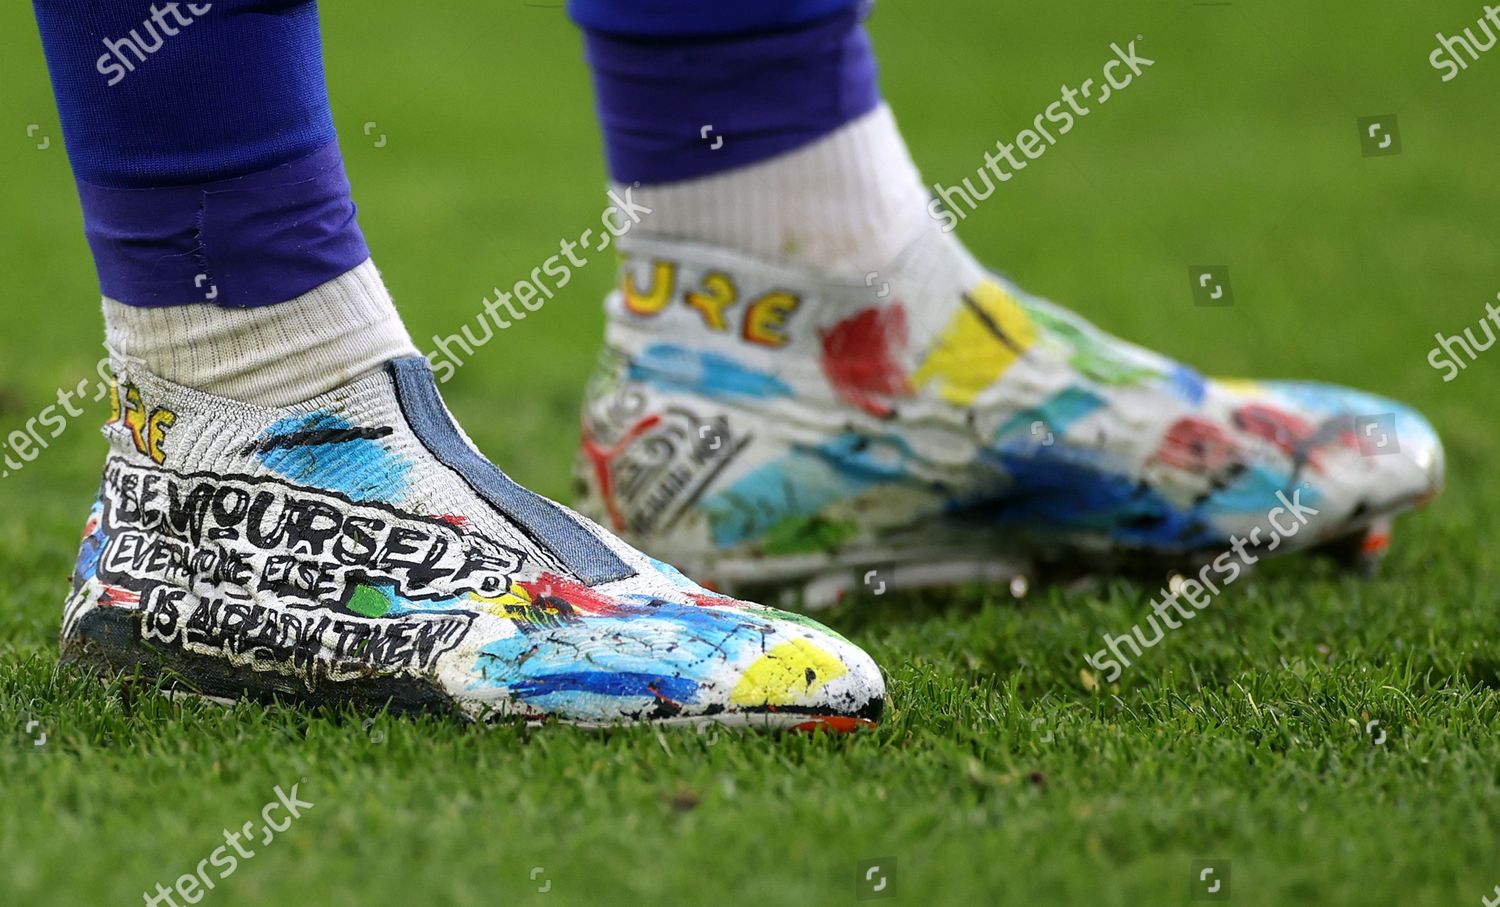 Colourful Boots Leicester Player James Maddison During Foto Editorial En Stock Imagen En Stock Shutterstock